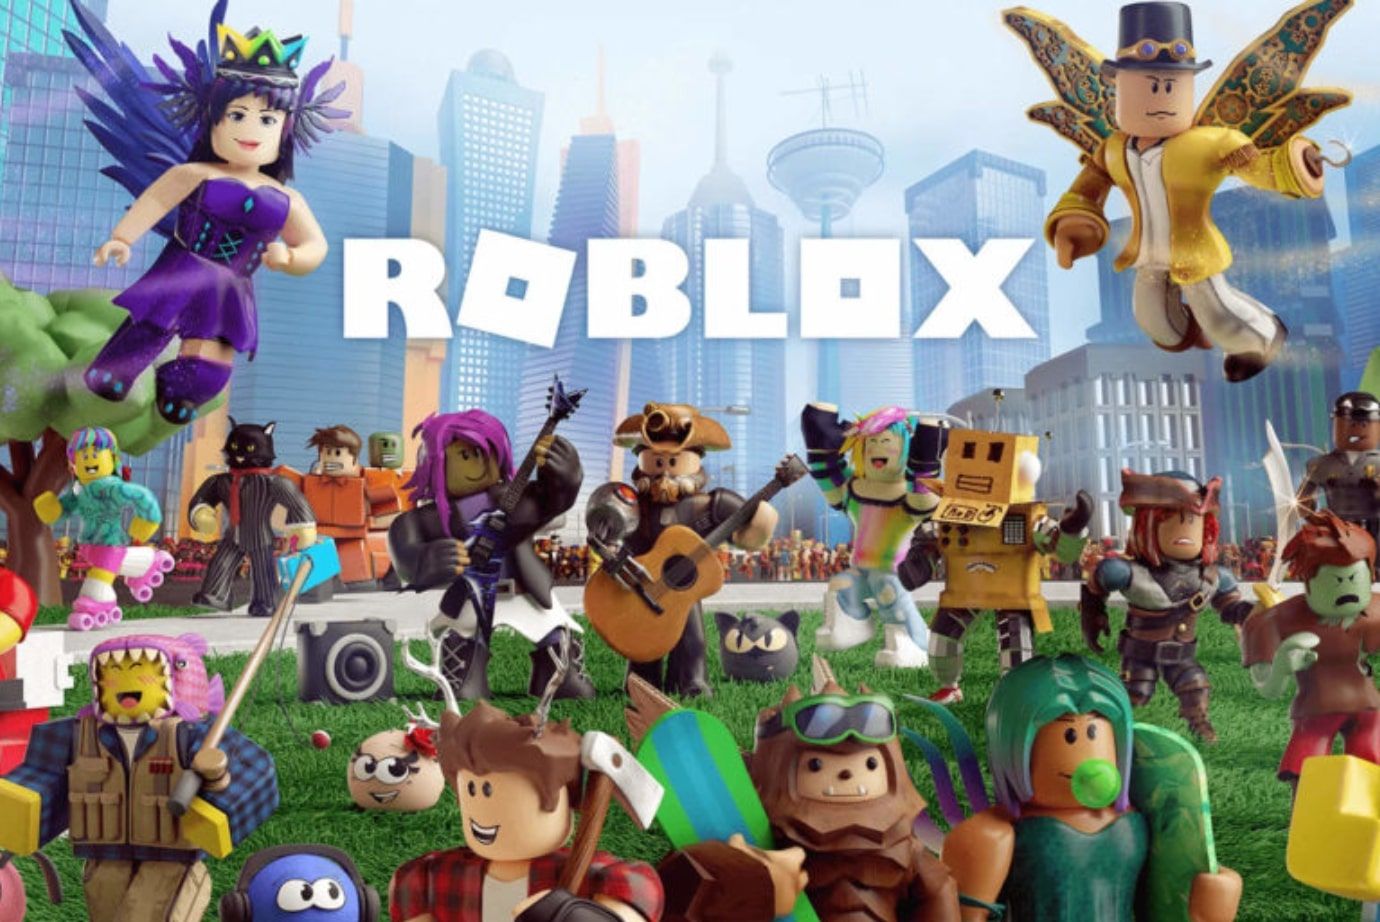 Roblox September 2020 Promo Codes New Cosmetics All Active Codes Backpacks Crystalline Companion More - promocodes roblox 2020 september